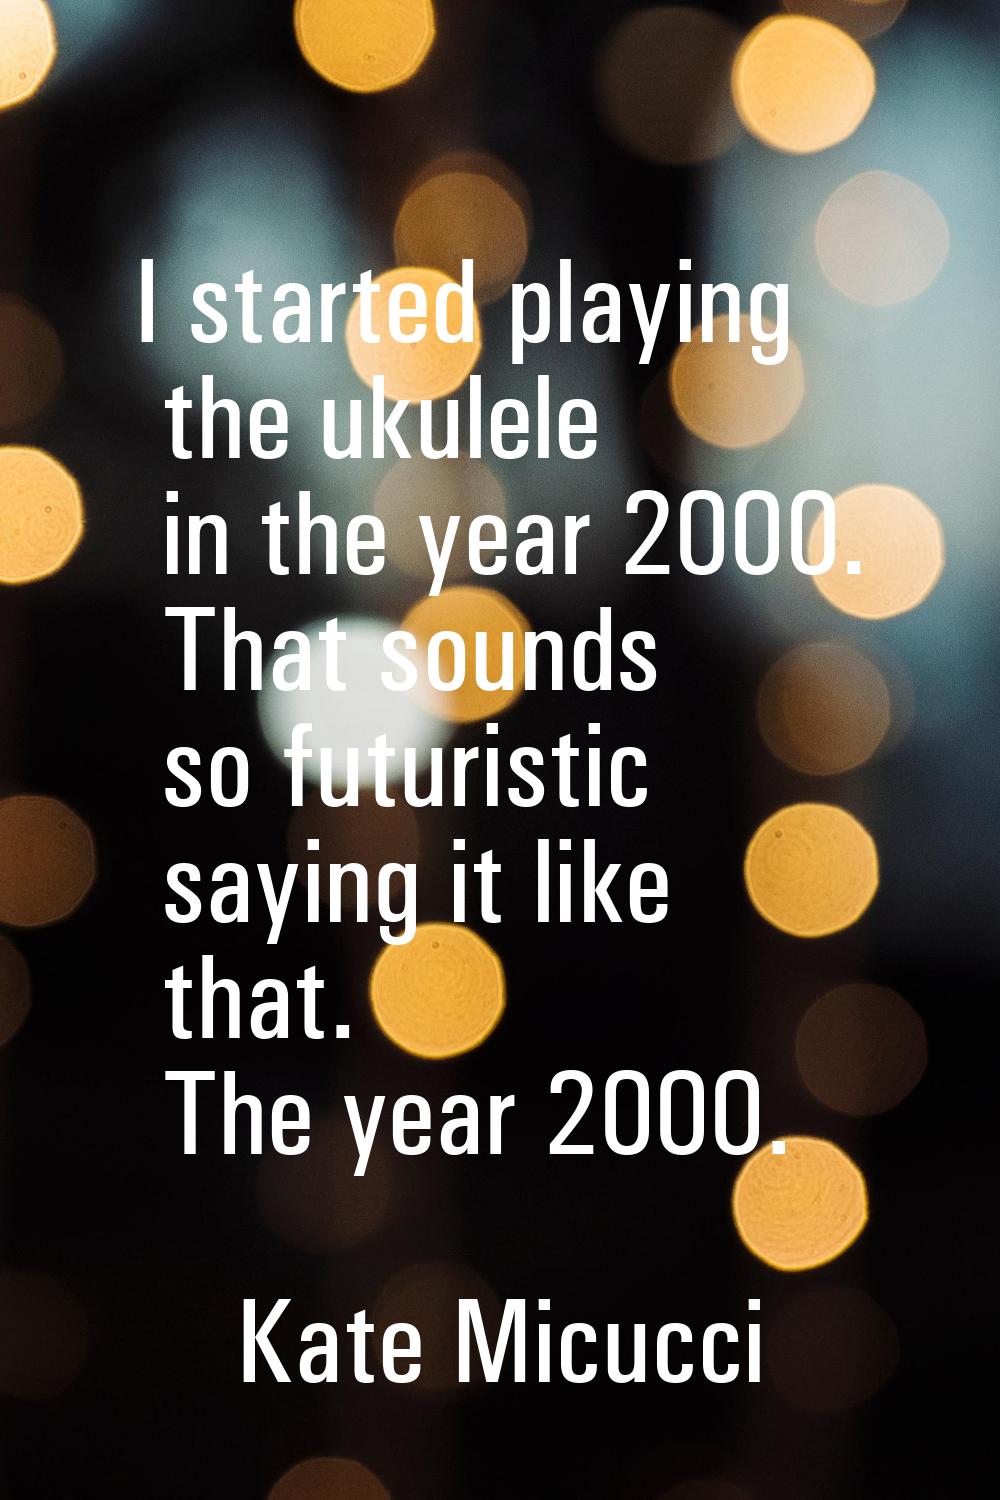 I started playing the ukulele in the year 2000. That sounds so futuristic saying it like that. The 